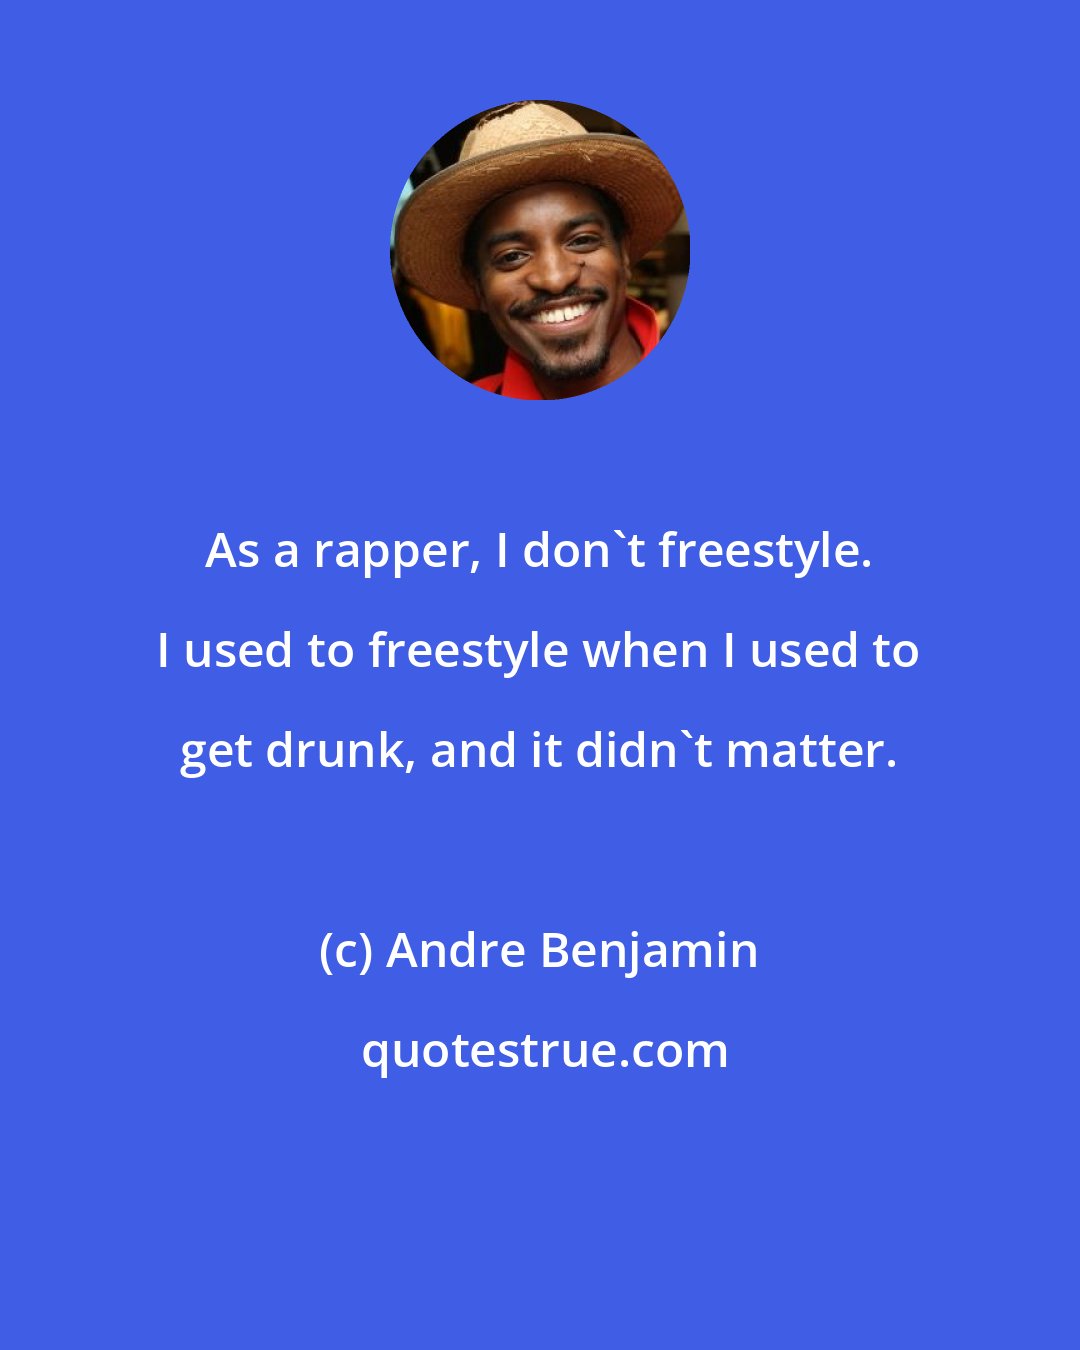 Andre Benjamin: As a rapper, I don't freestyle. I used to freestyle when I used to get drunk, and it didn't matter.